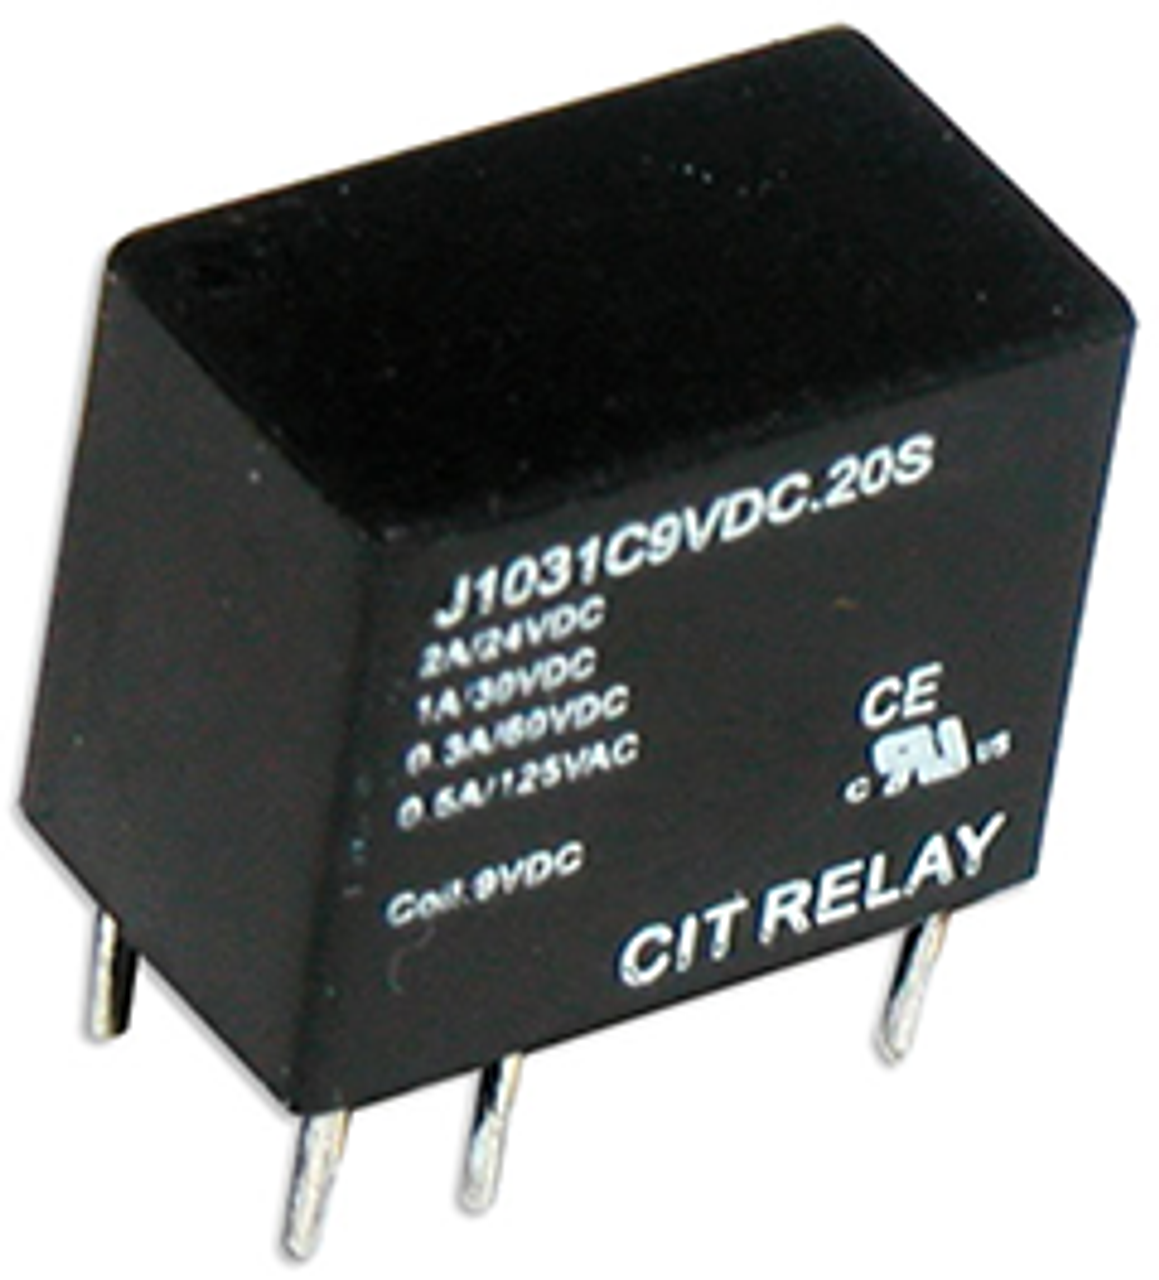 CIT Relay and Switch J1031C9VDC.15S Signal Relays